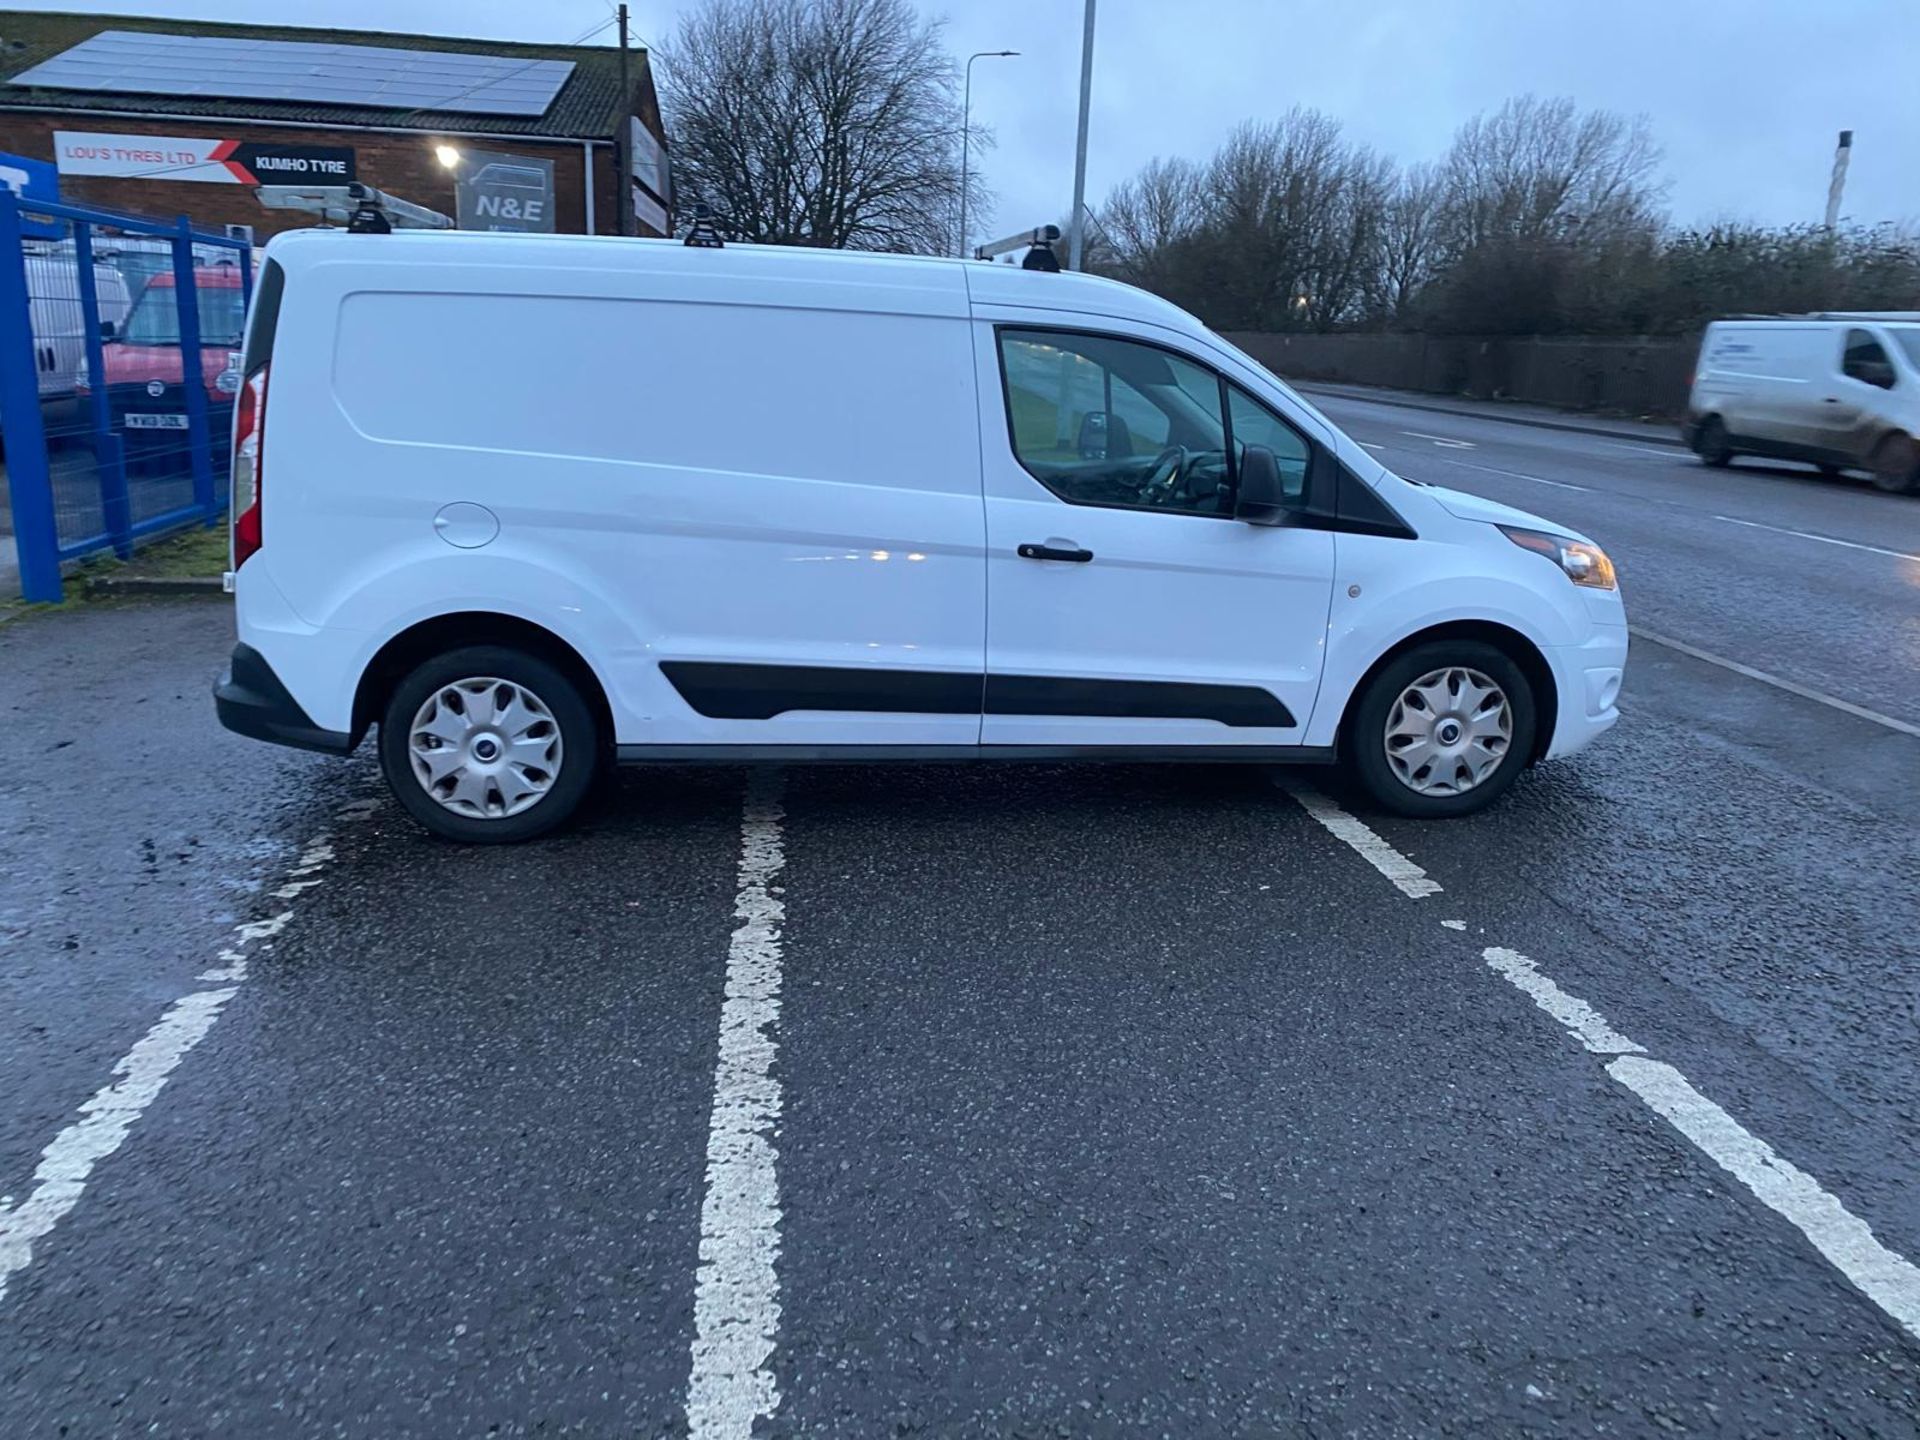 2018 18 FORD TRANSIT CONNECT TREND PAENL VAN - 128K MILES - EURO 6 - 3 SEATS - LWB - ROOF RACK. - Image 6 of 13